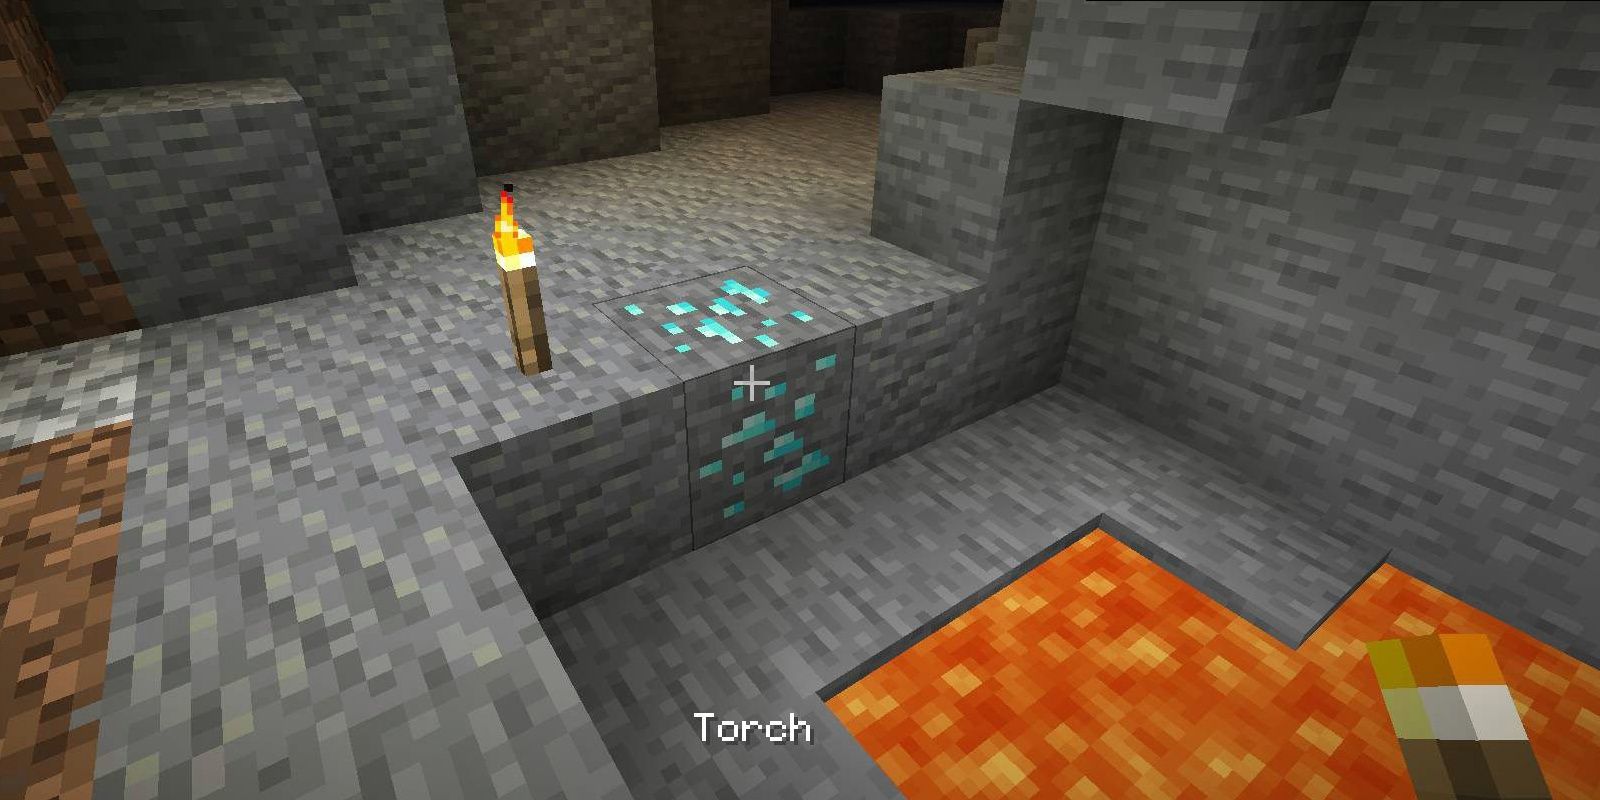 Minecraft Mining Diamonds Underground In A cave With Lava Holding Torches